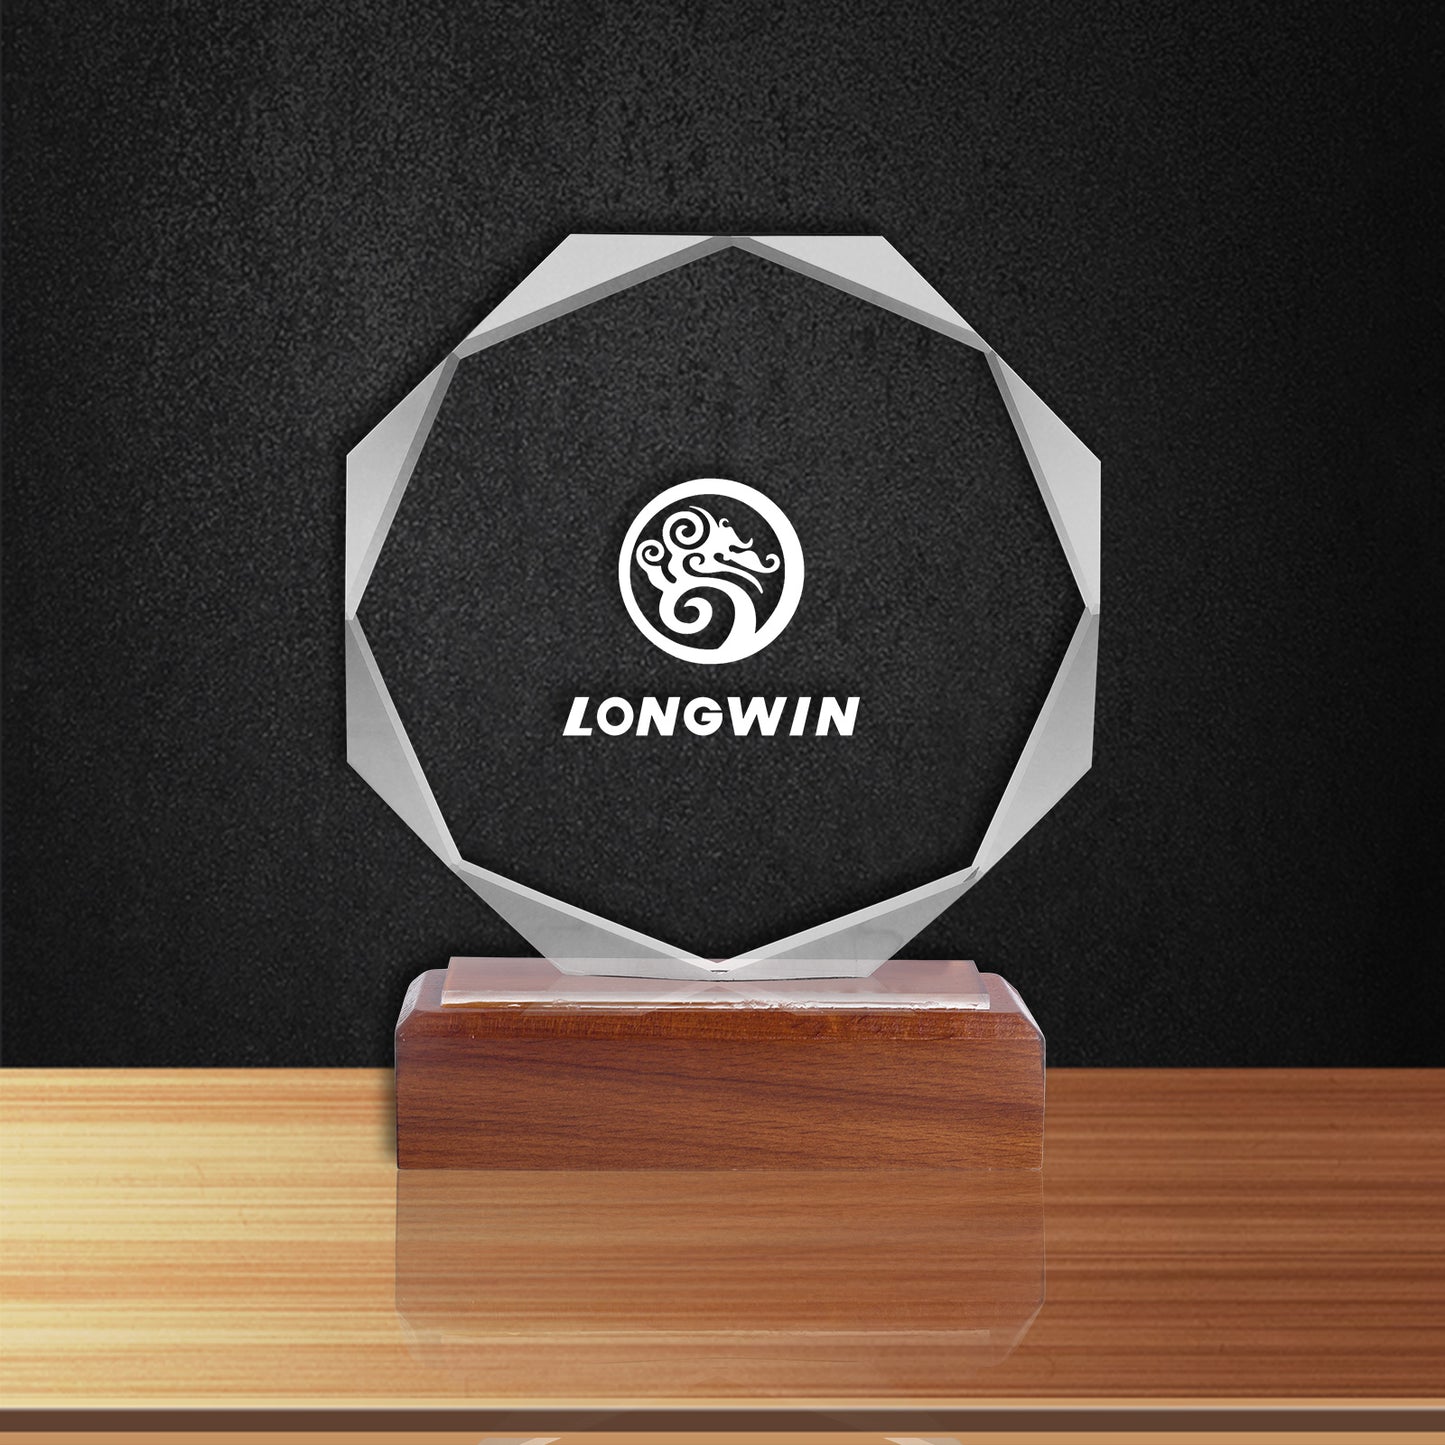 JNCT-195 Longwin Octagonal Crystal Trophy with Wooden Base